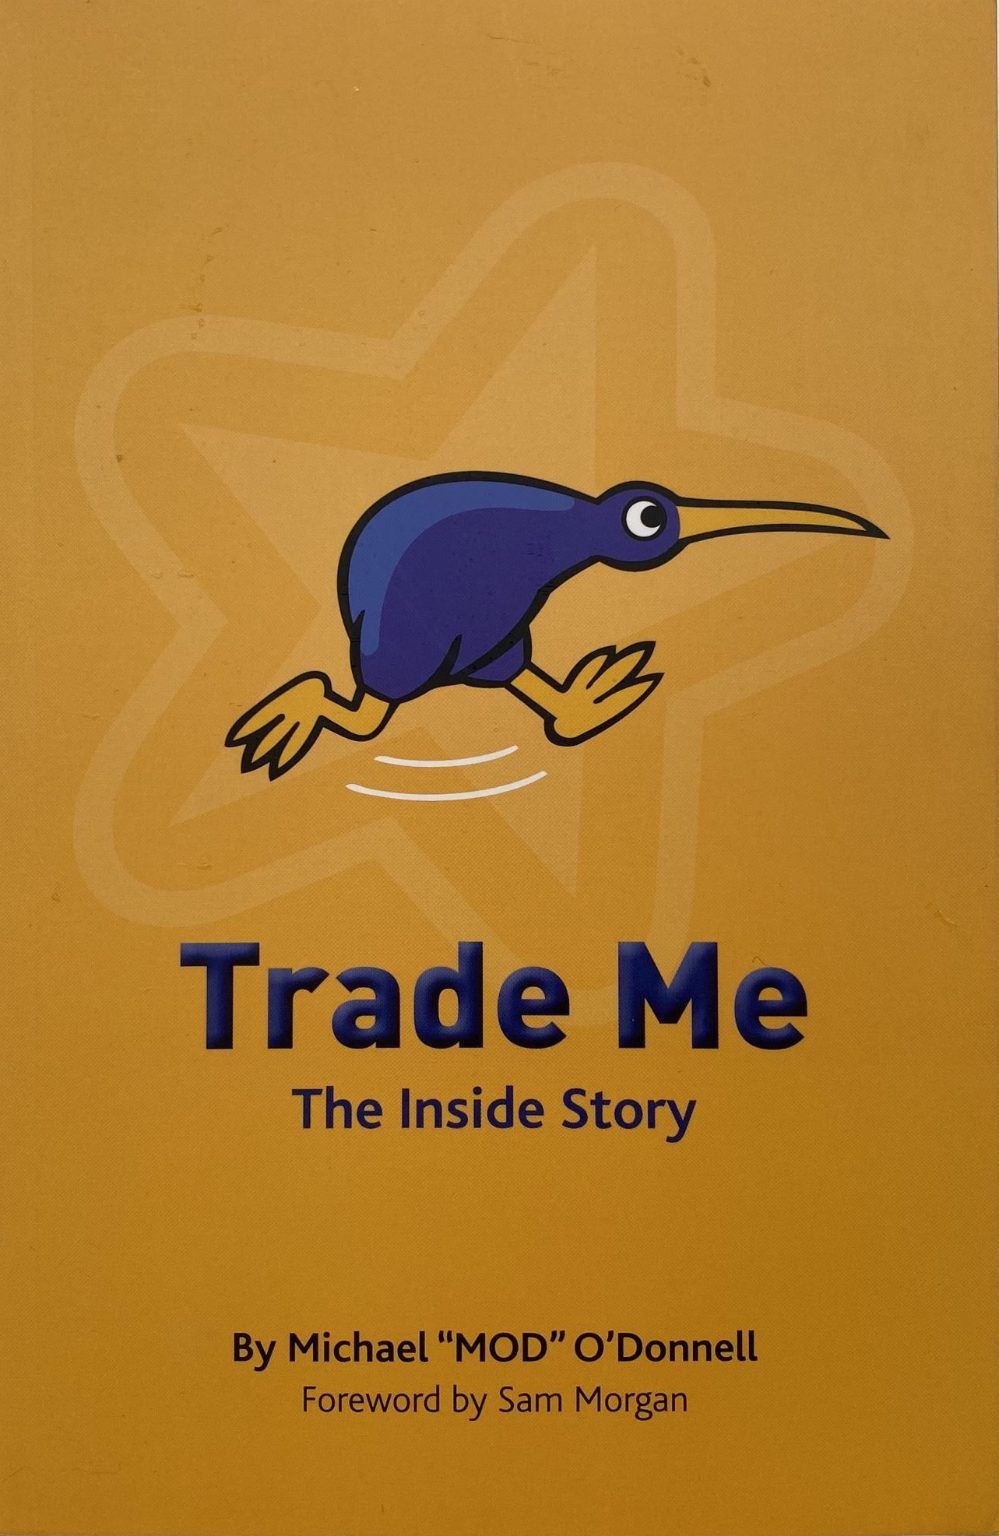 TRADE ME: The Inside Story